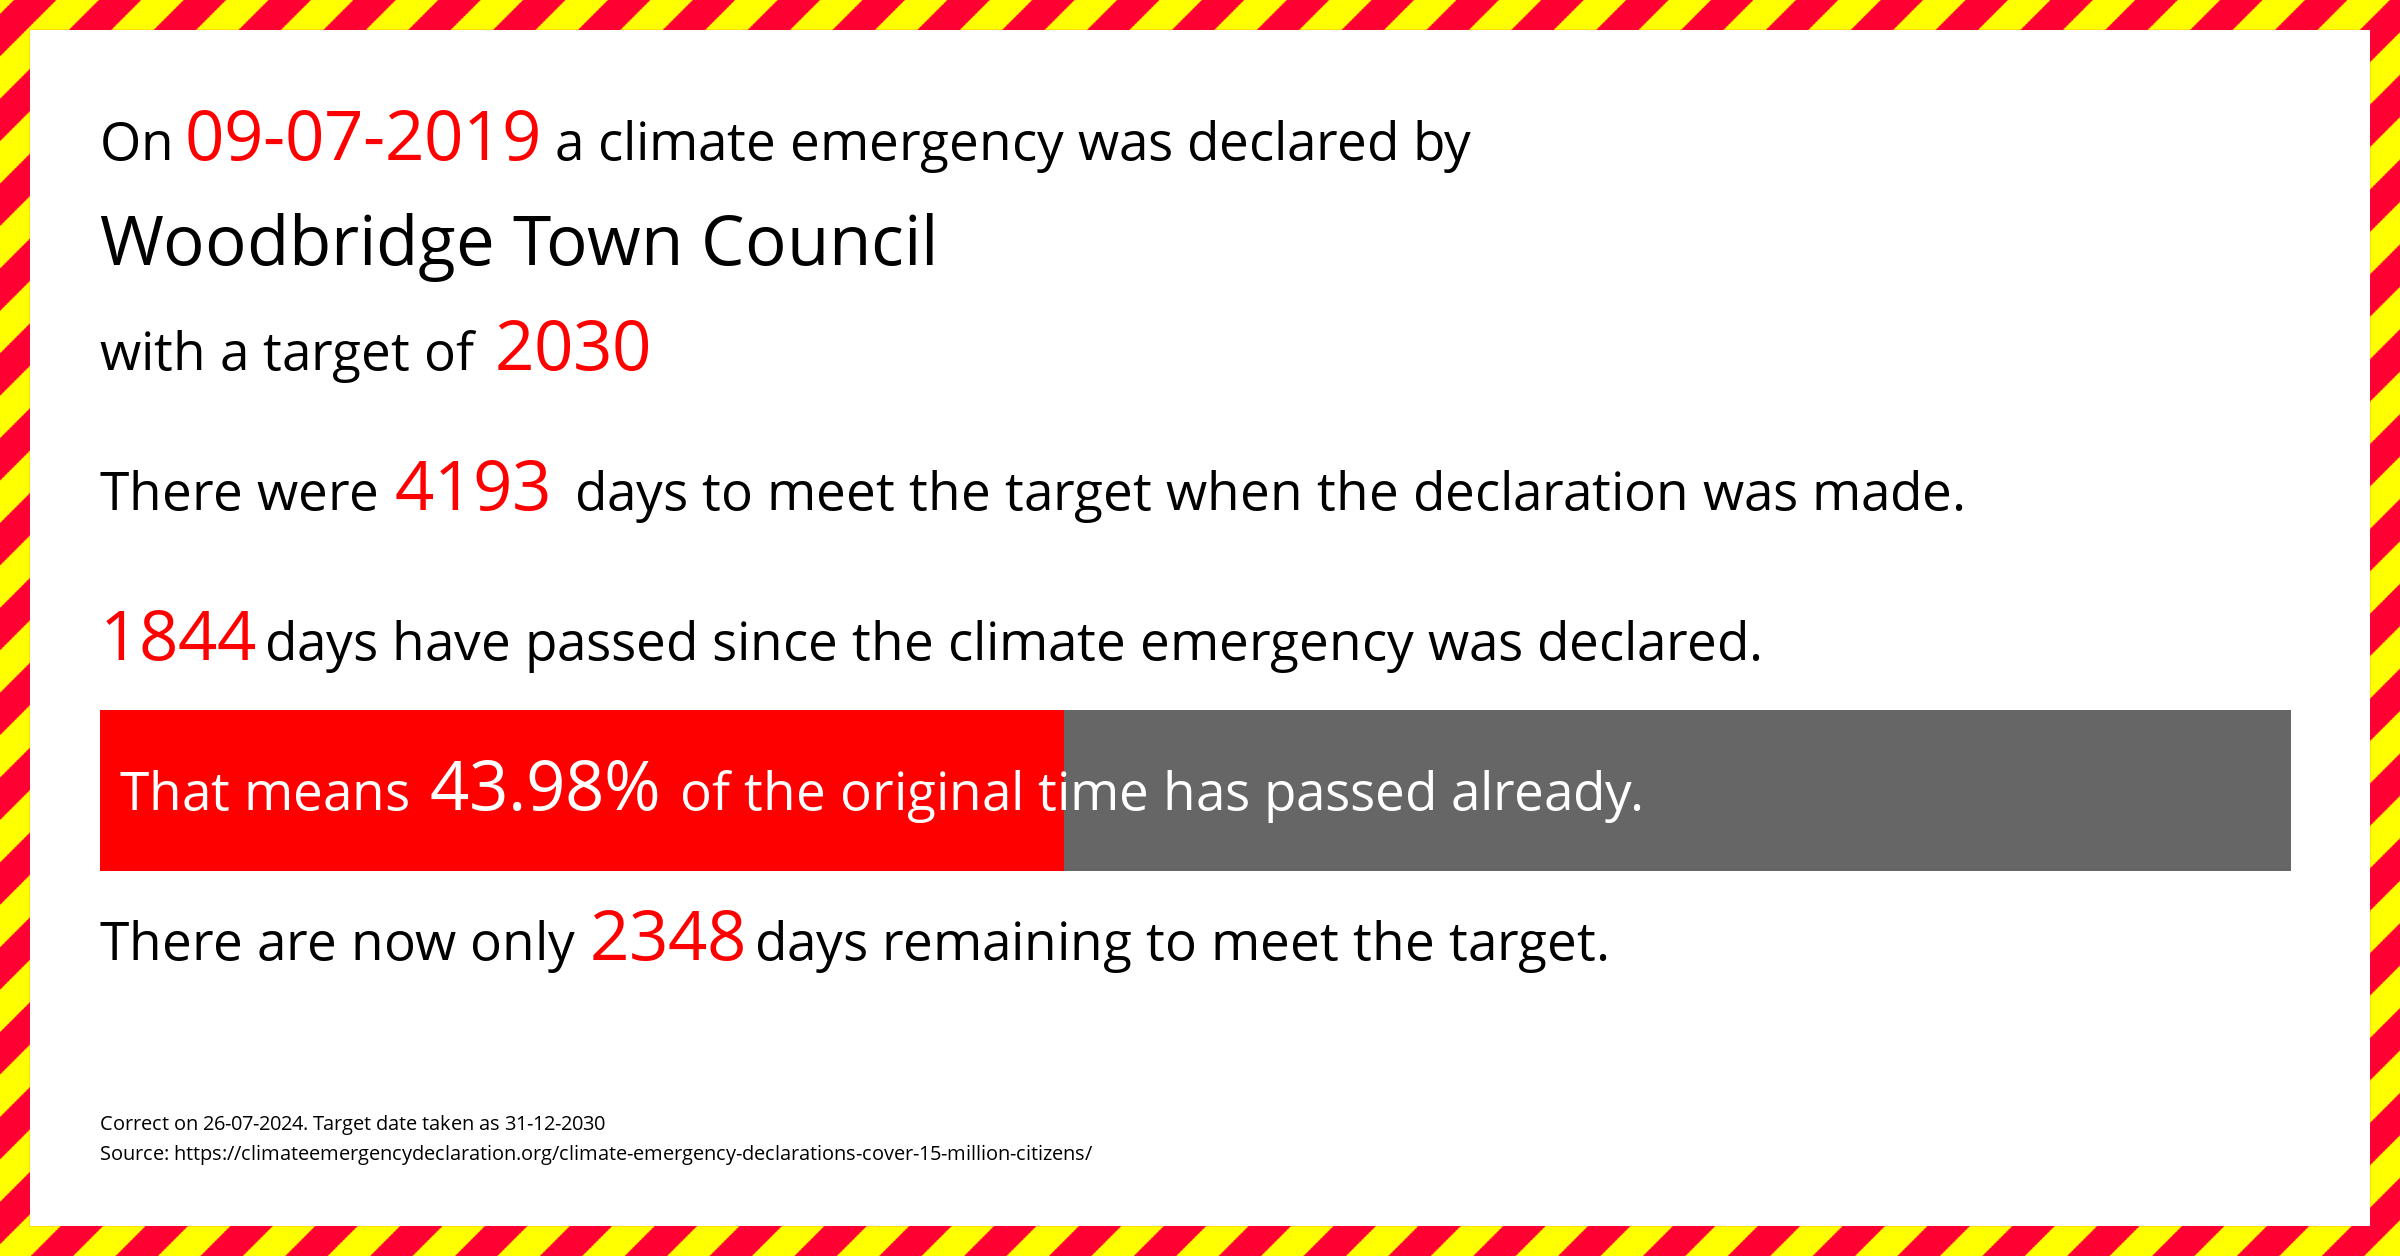 Woodbridge Town Council declared a Climate emergency on Tuesday 9th July 2019, with a target of 2030.